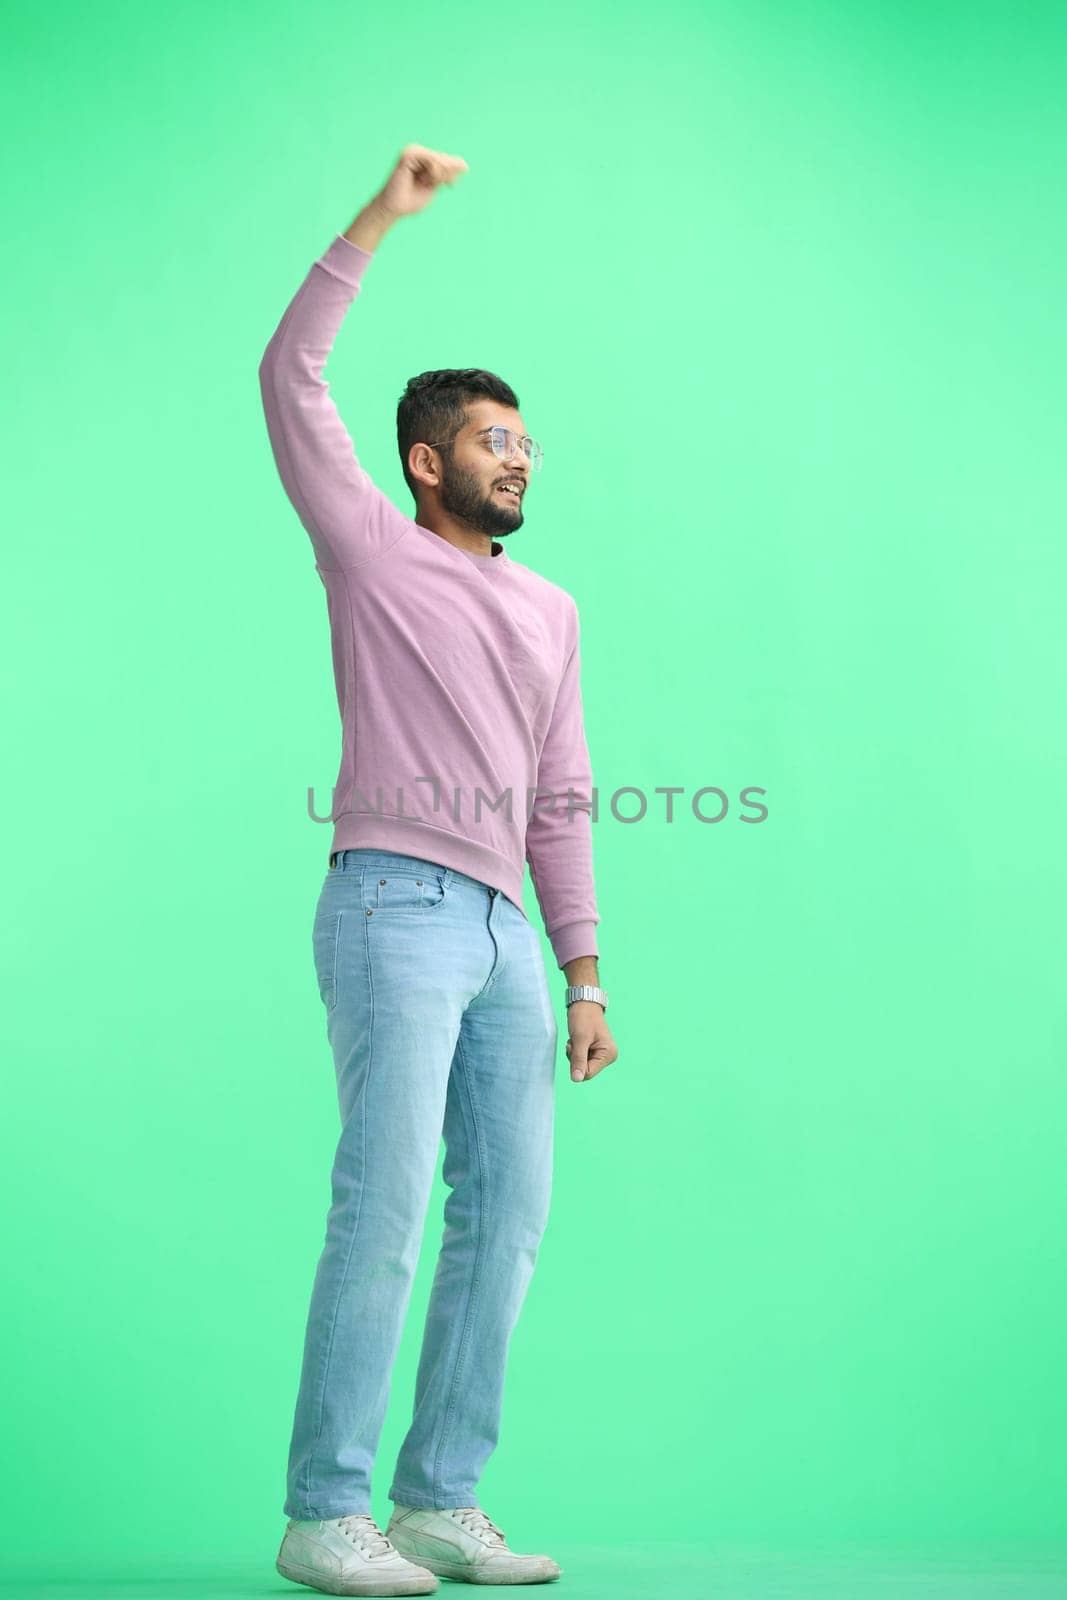 A man, on a green background, in full height, raised his hand.